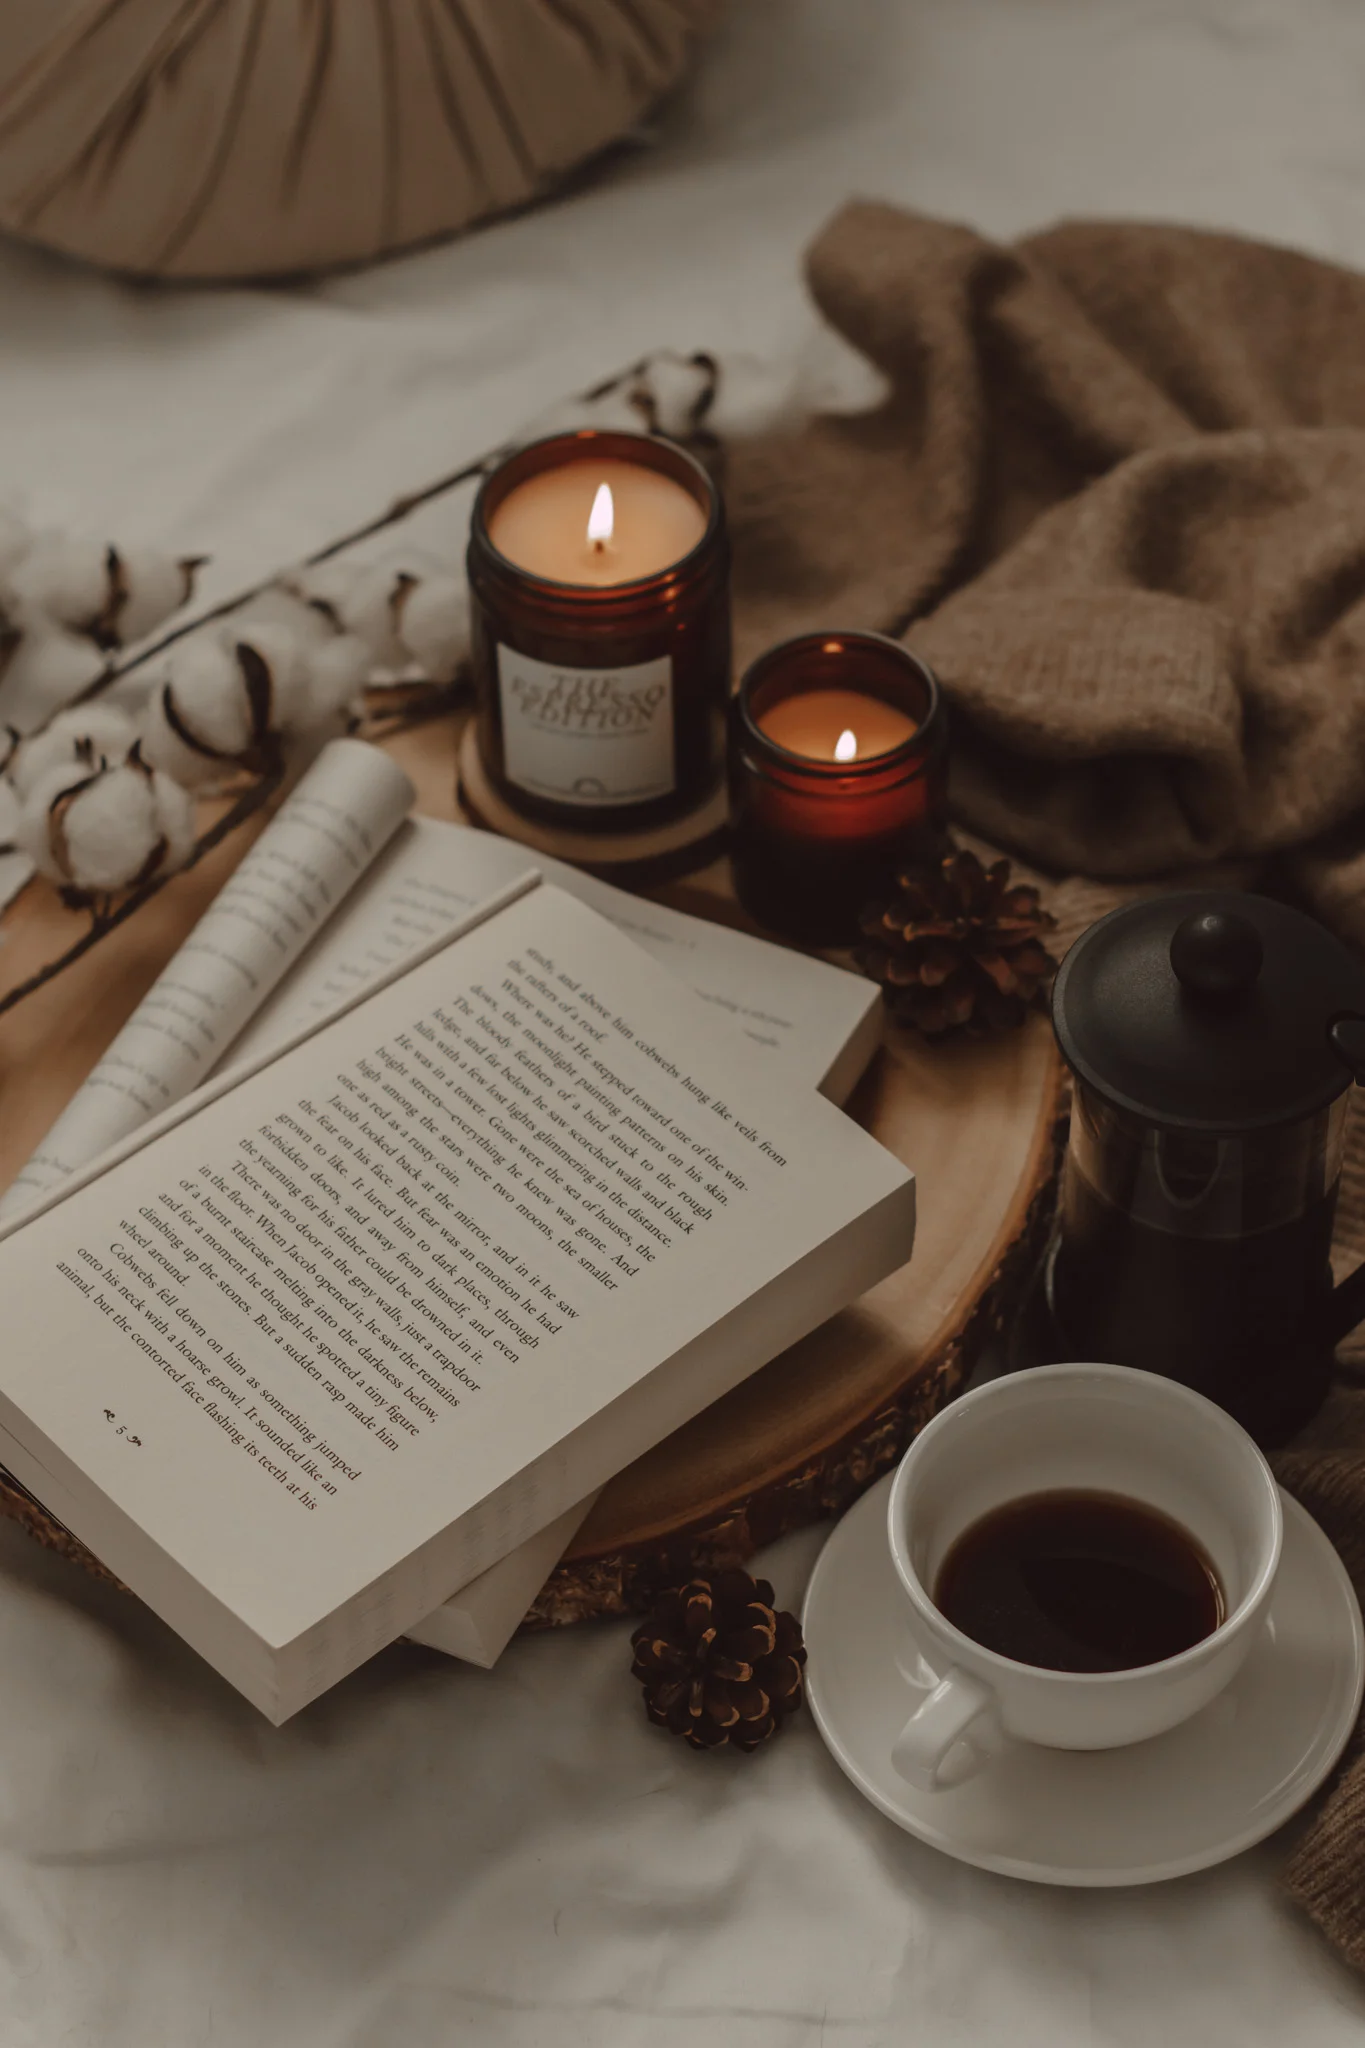 10 Underrated Romance Books That Will Bring You So Much Joy by The Espresso Edition cozy bookish blog